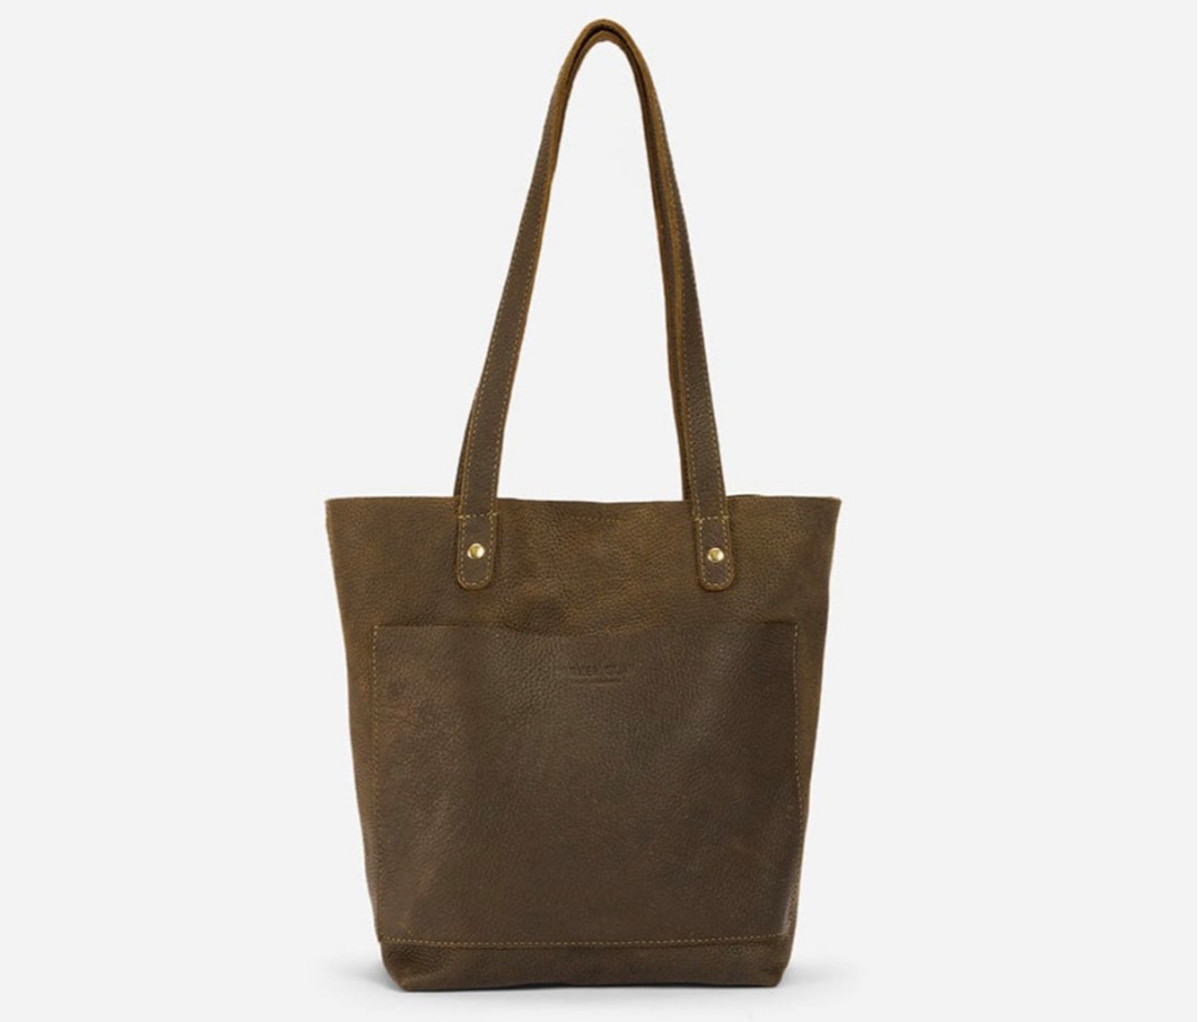 Modern Designer Tote Bag. Sustainable Gifts Gift for Mom 